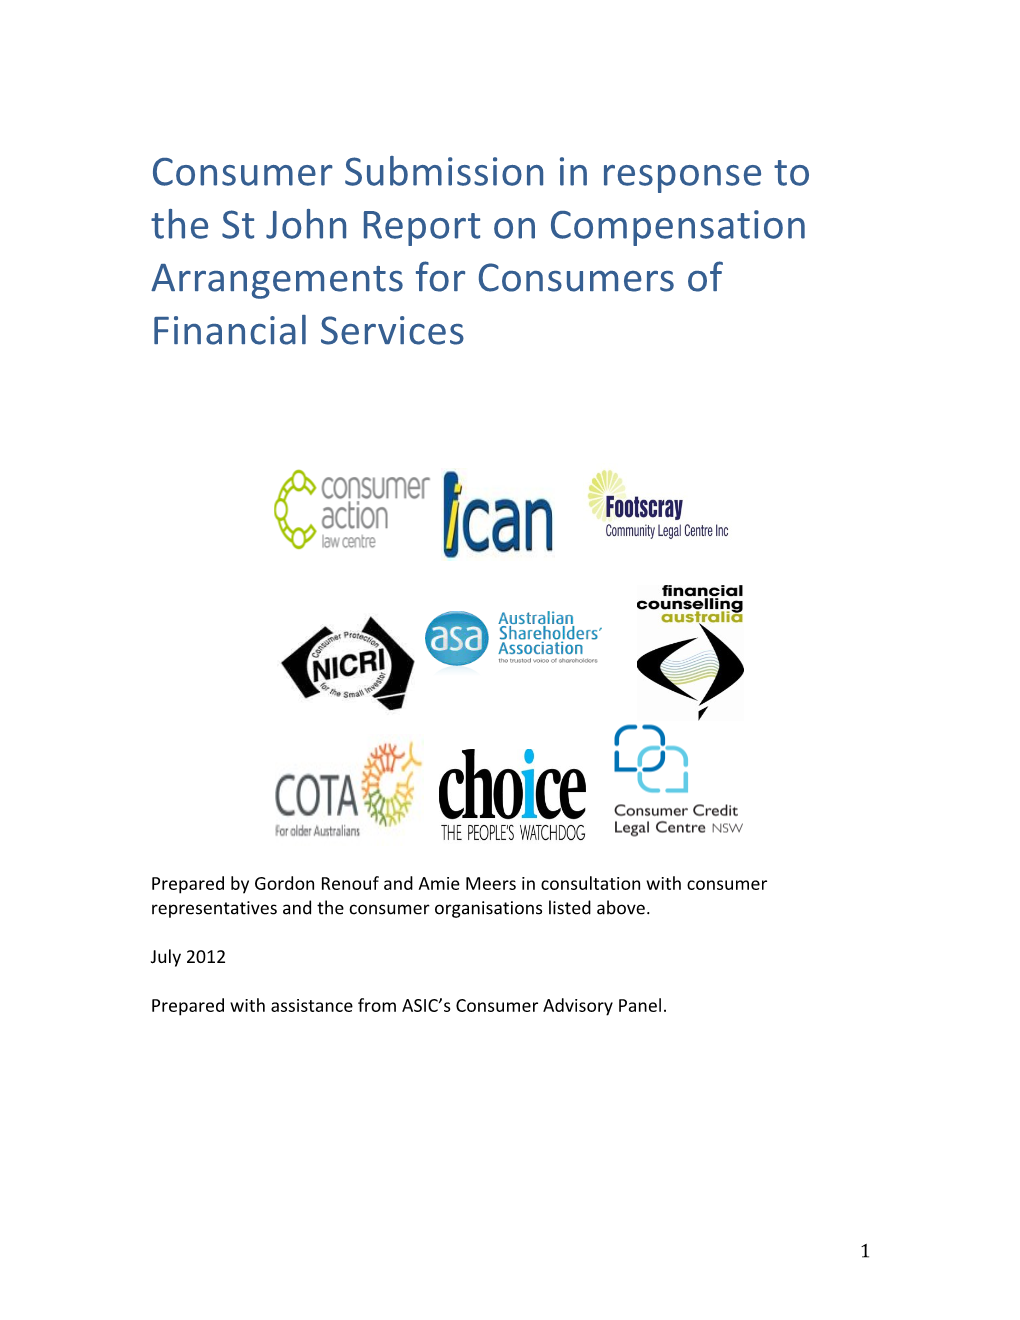 Submission to the Review of Compensation Arrangements for Consumers of Financial Services